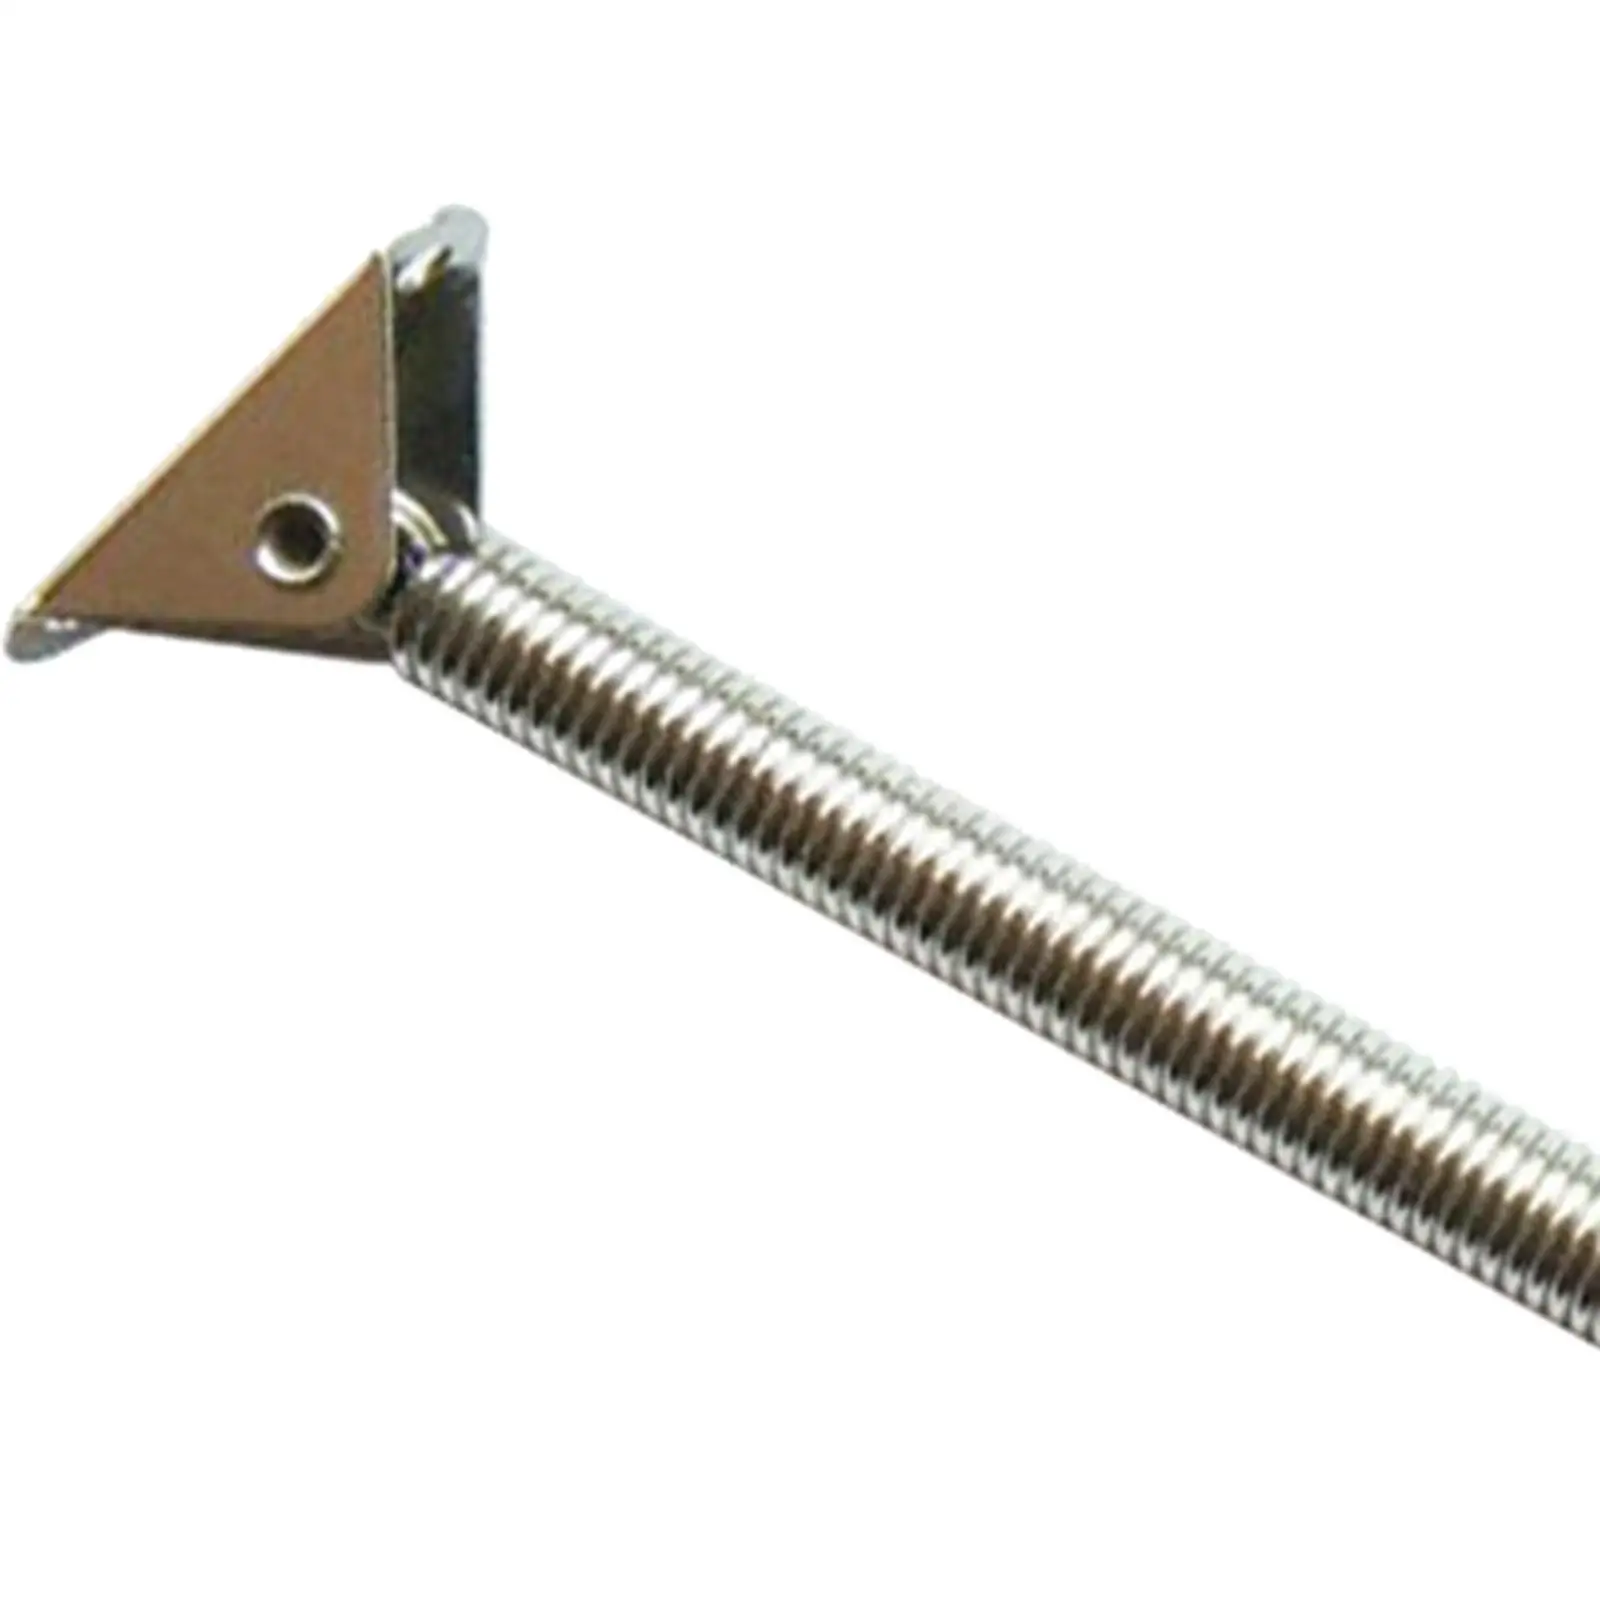 Boat Spring, Replacement Adjuster  Spring Holder  Yacht